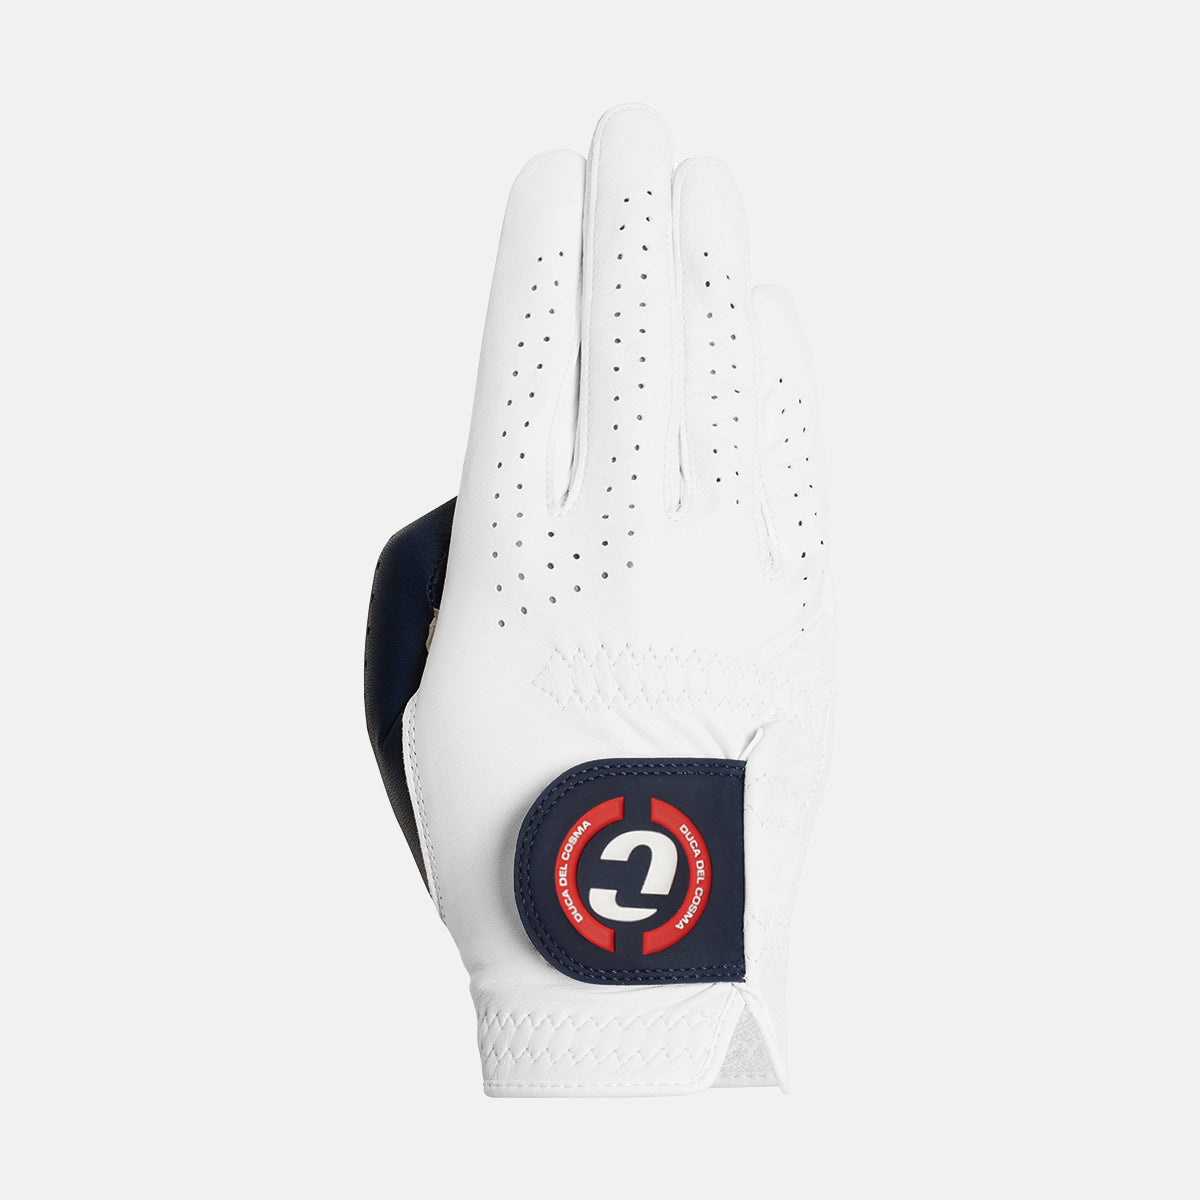 Elite pro sentosa right-handed white men's golf glove for tour-level player's with quick drying technology